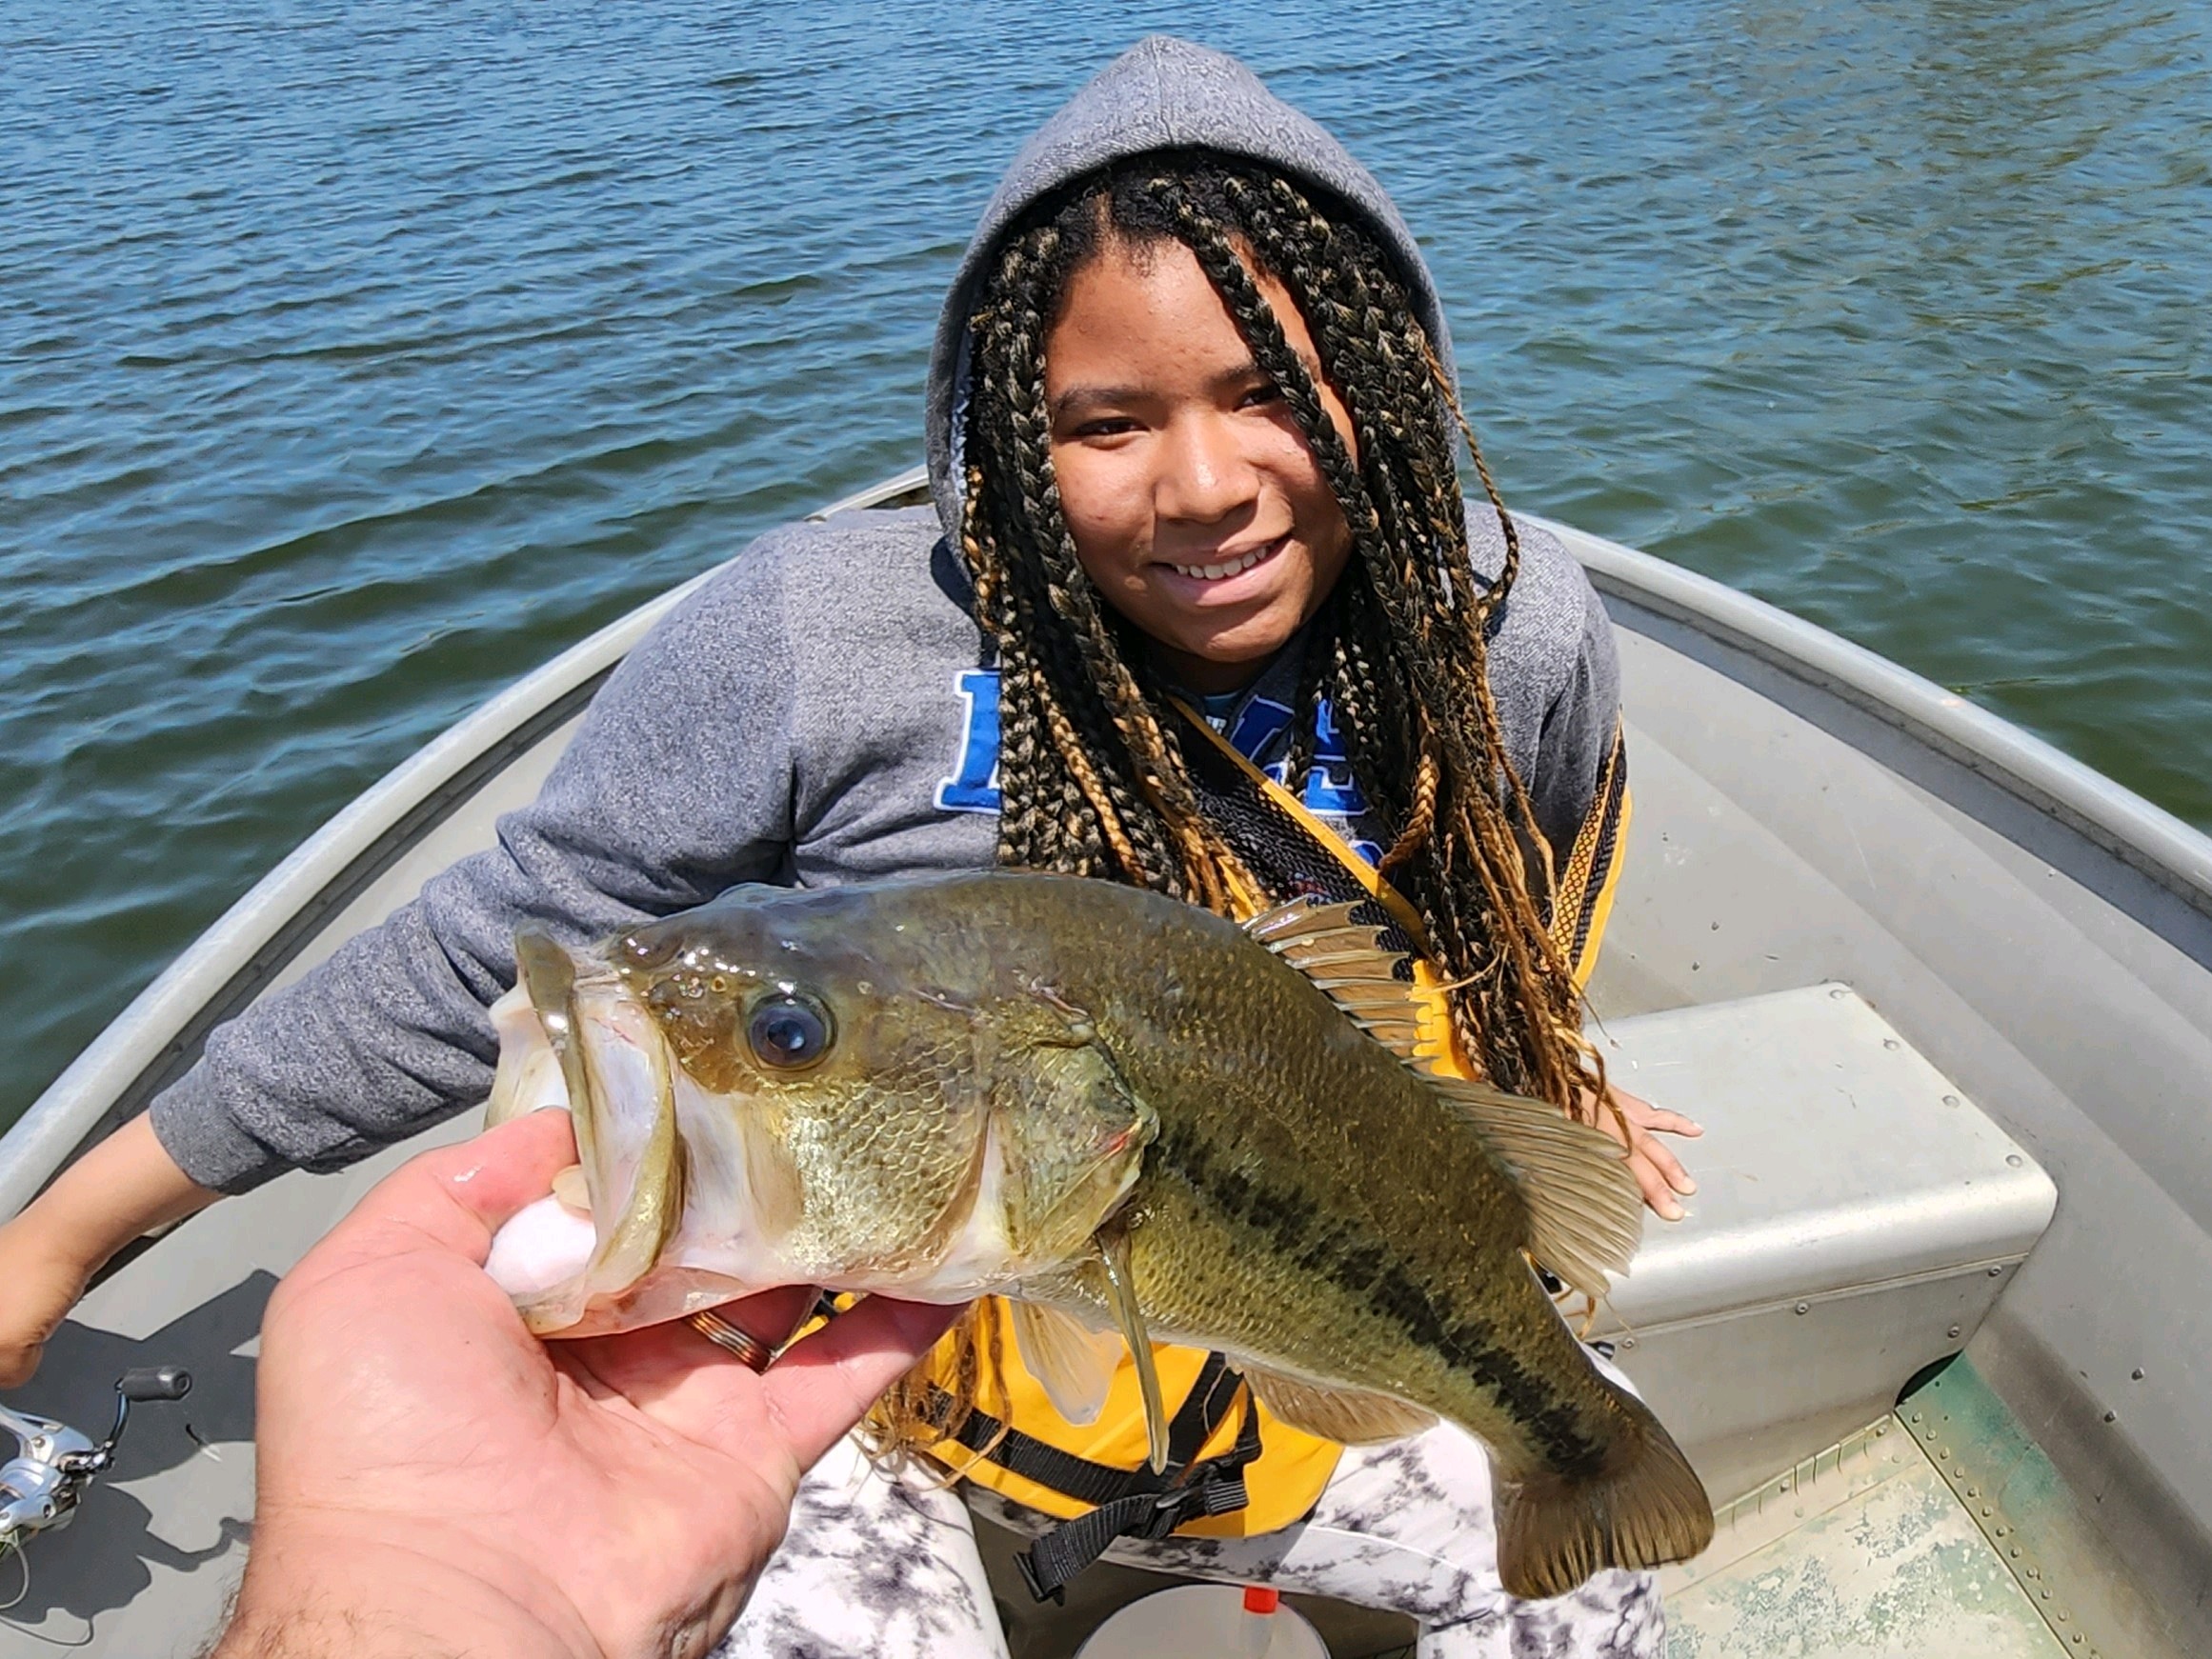 Student holds up fish they caught.